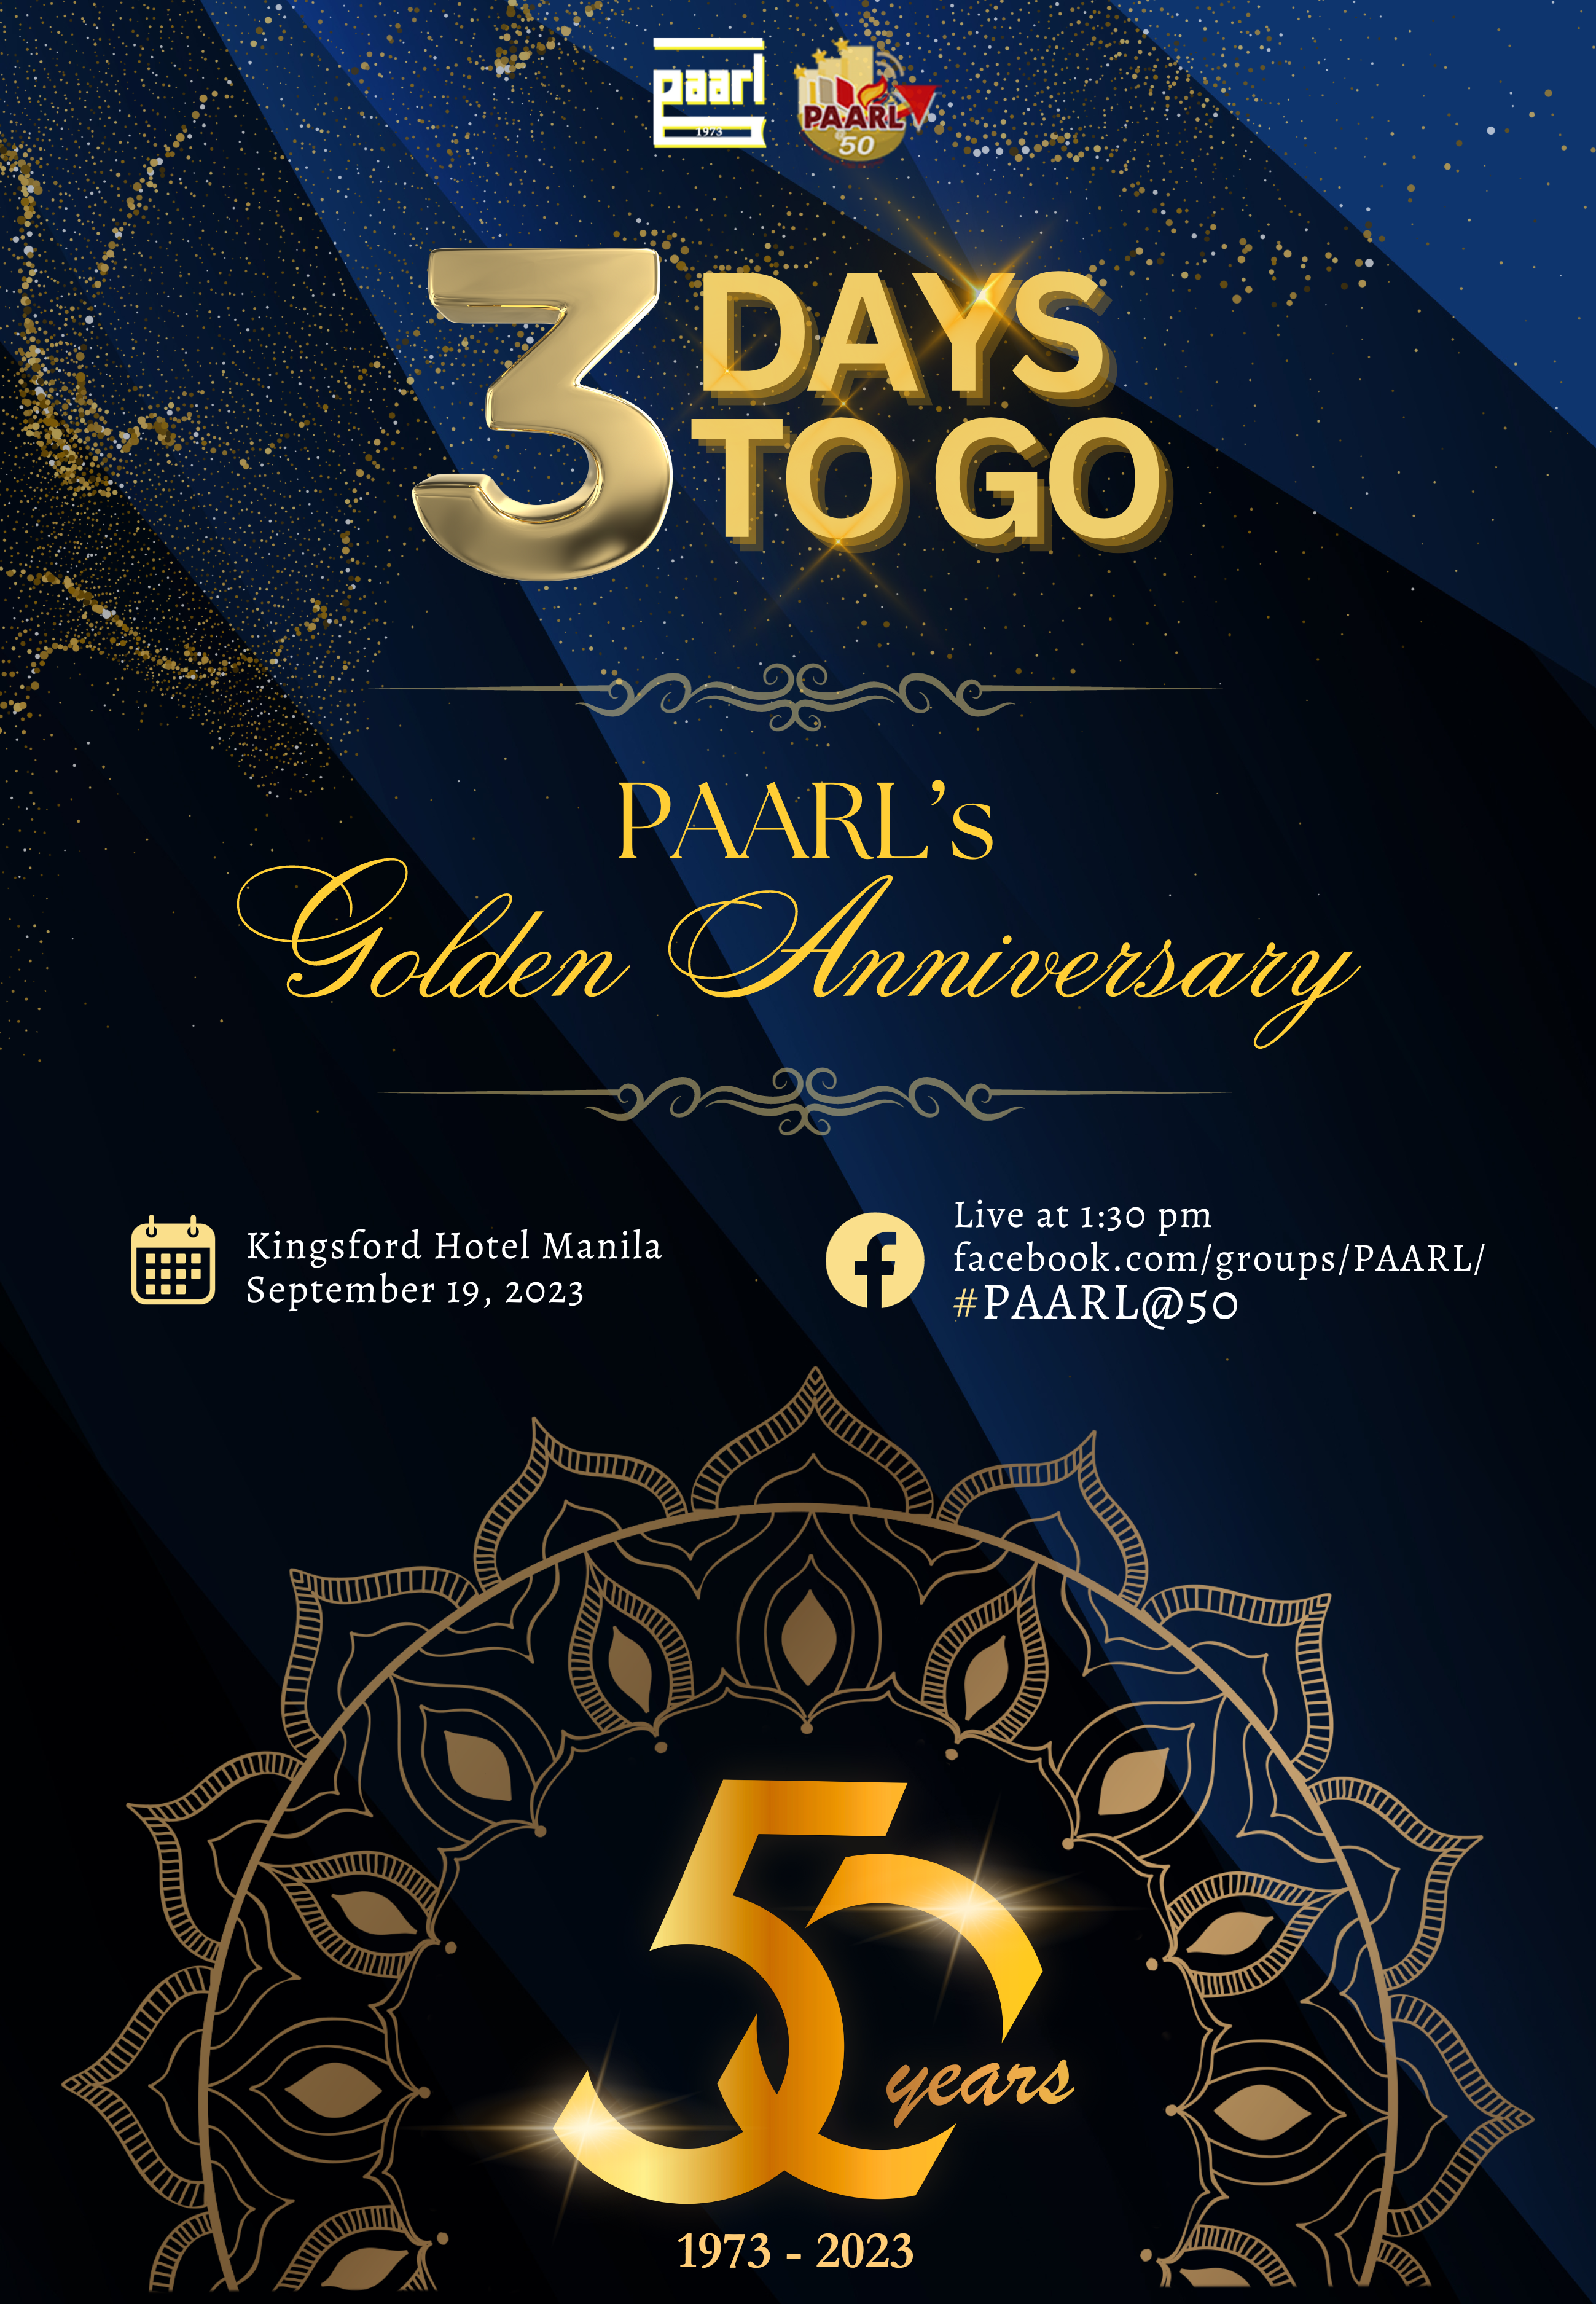 3 Days to Go until PAARL’s 50th Anniversary!